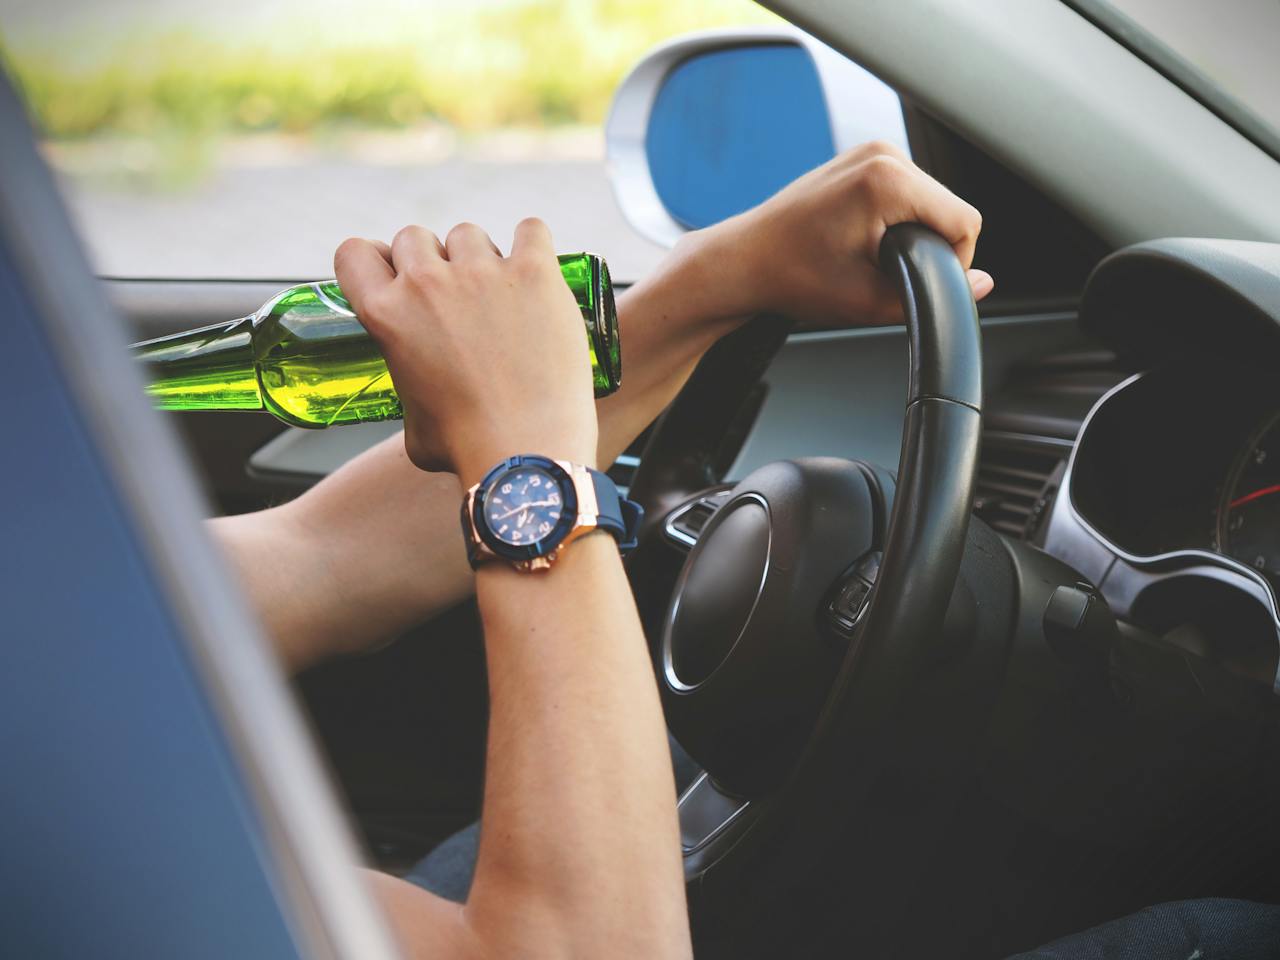 5 Facts You Should Know About A DUI Charge